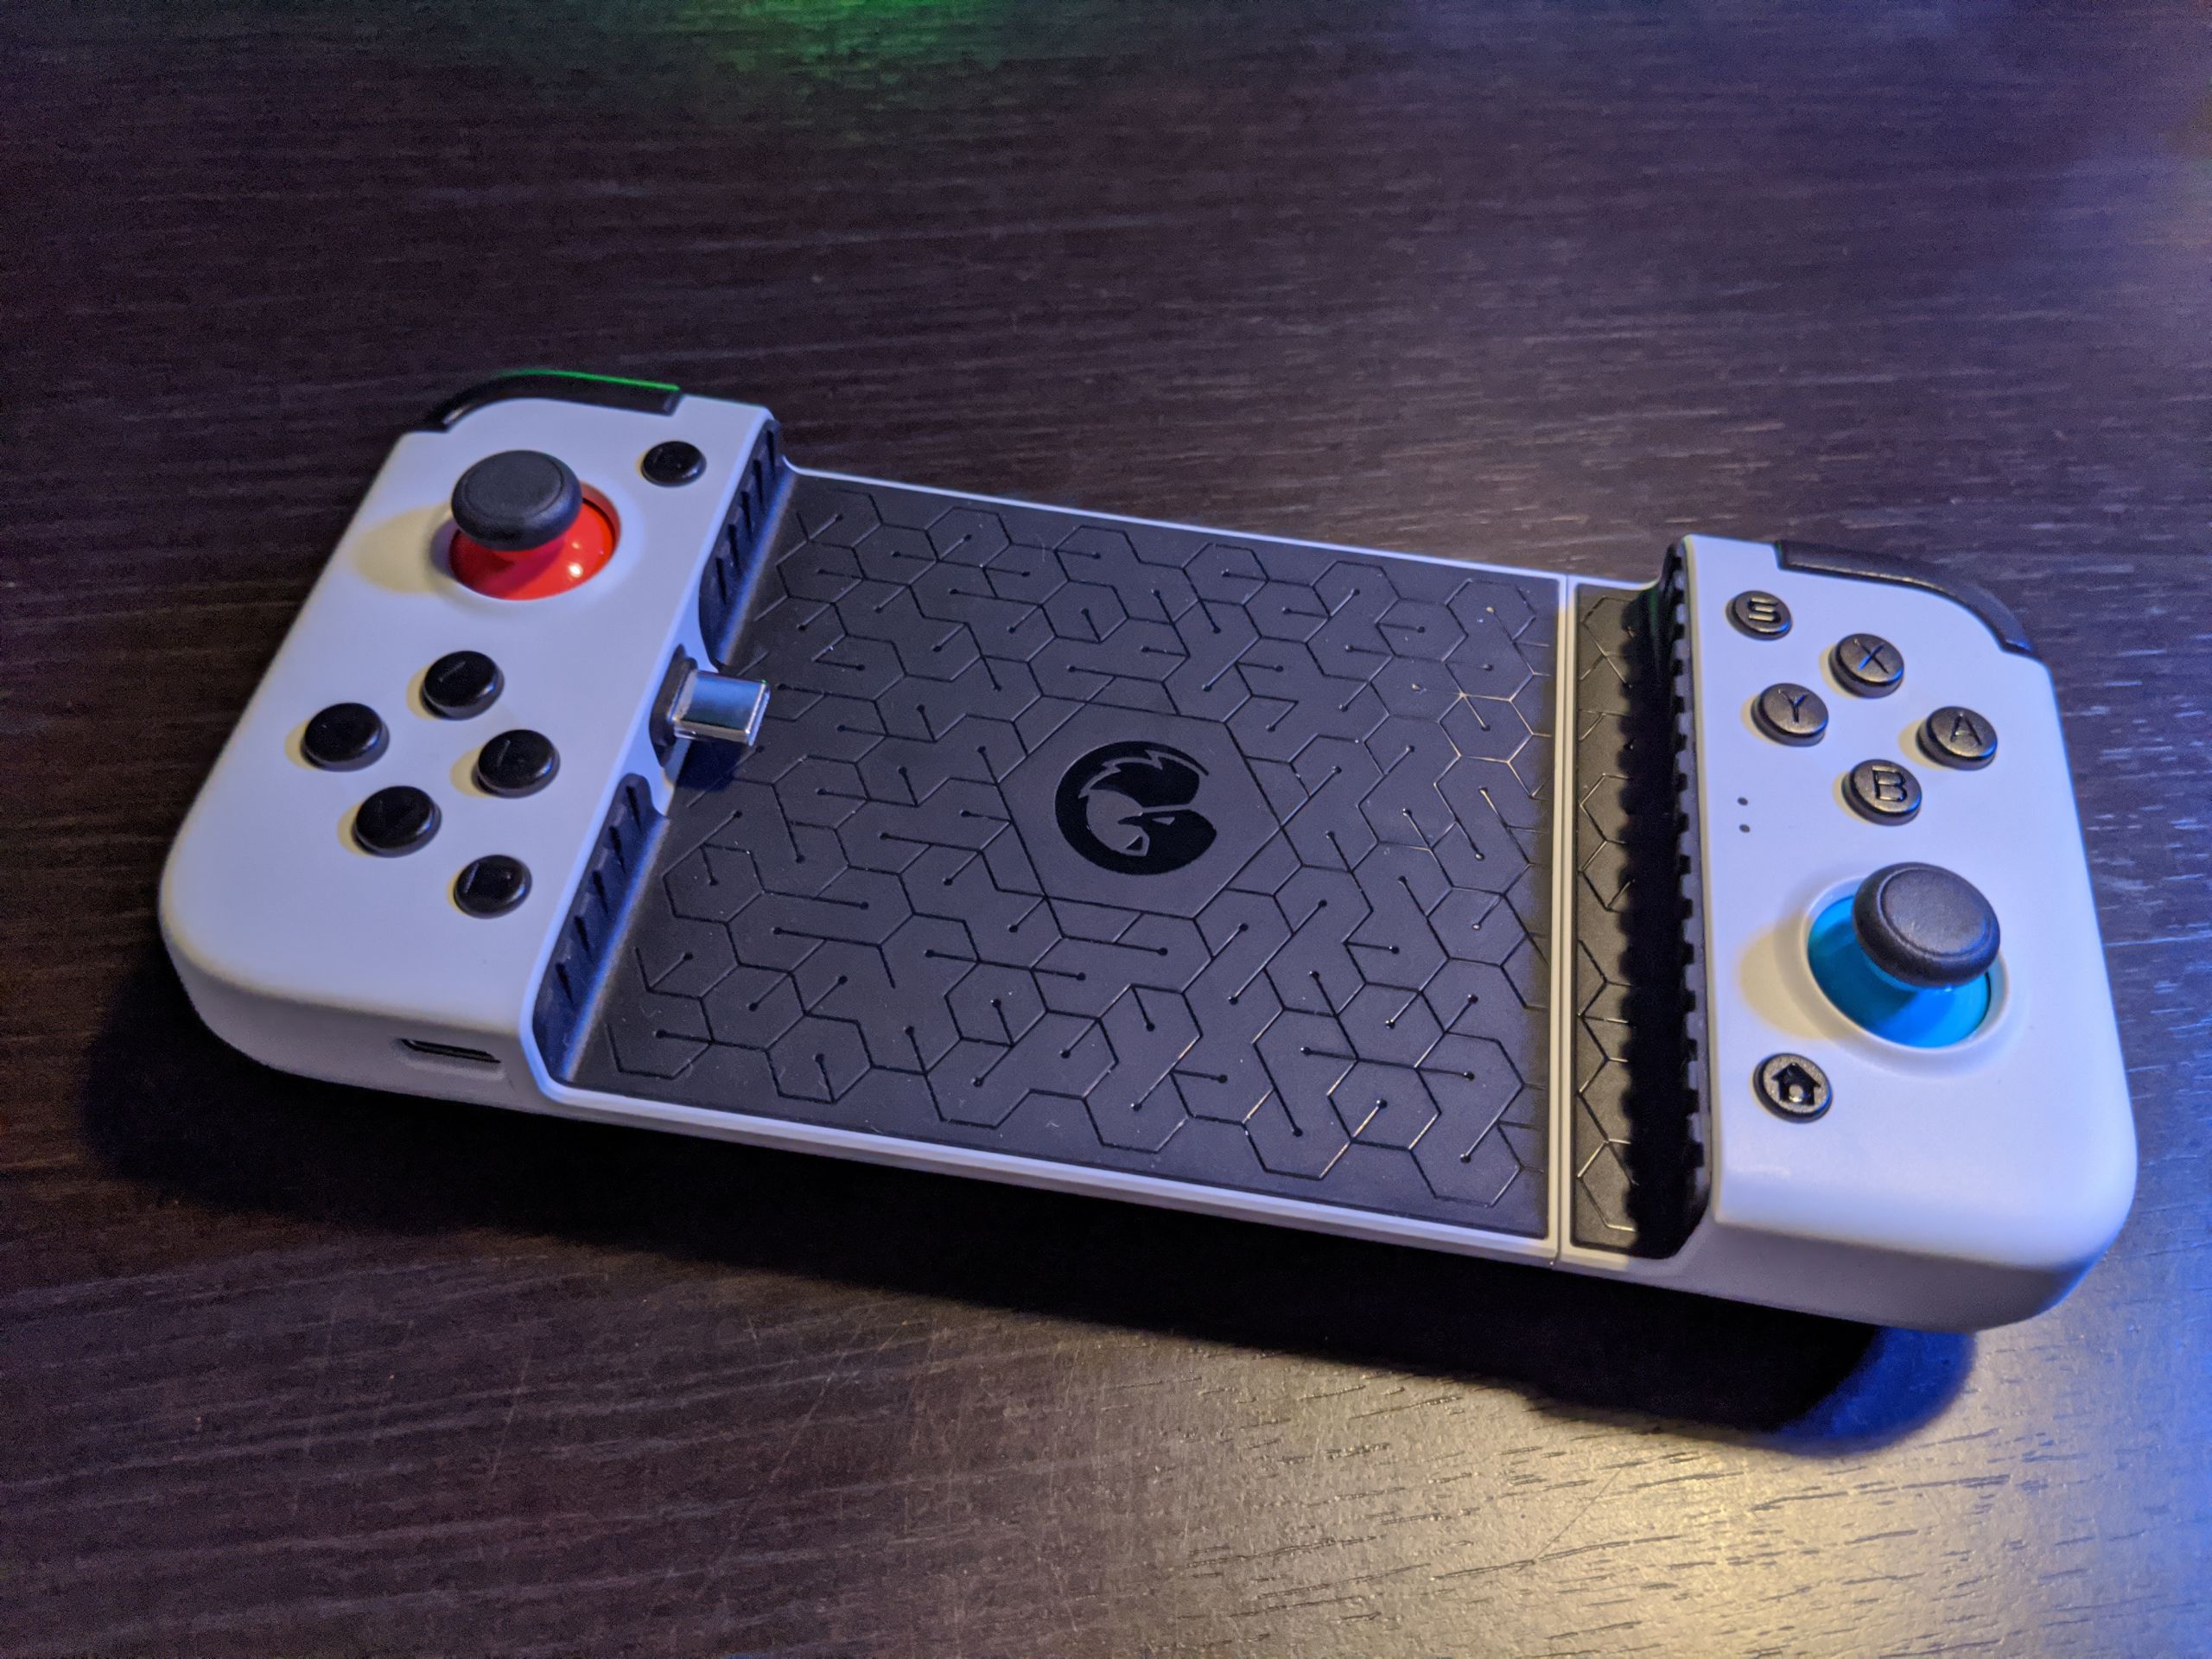 GameSir X2 Mobile Controller Review: Turn You Smartphone Into a Handheld  Console - KeenGamer